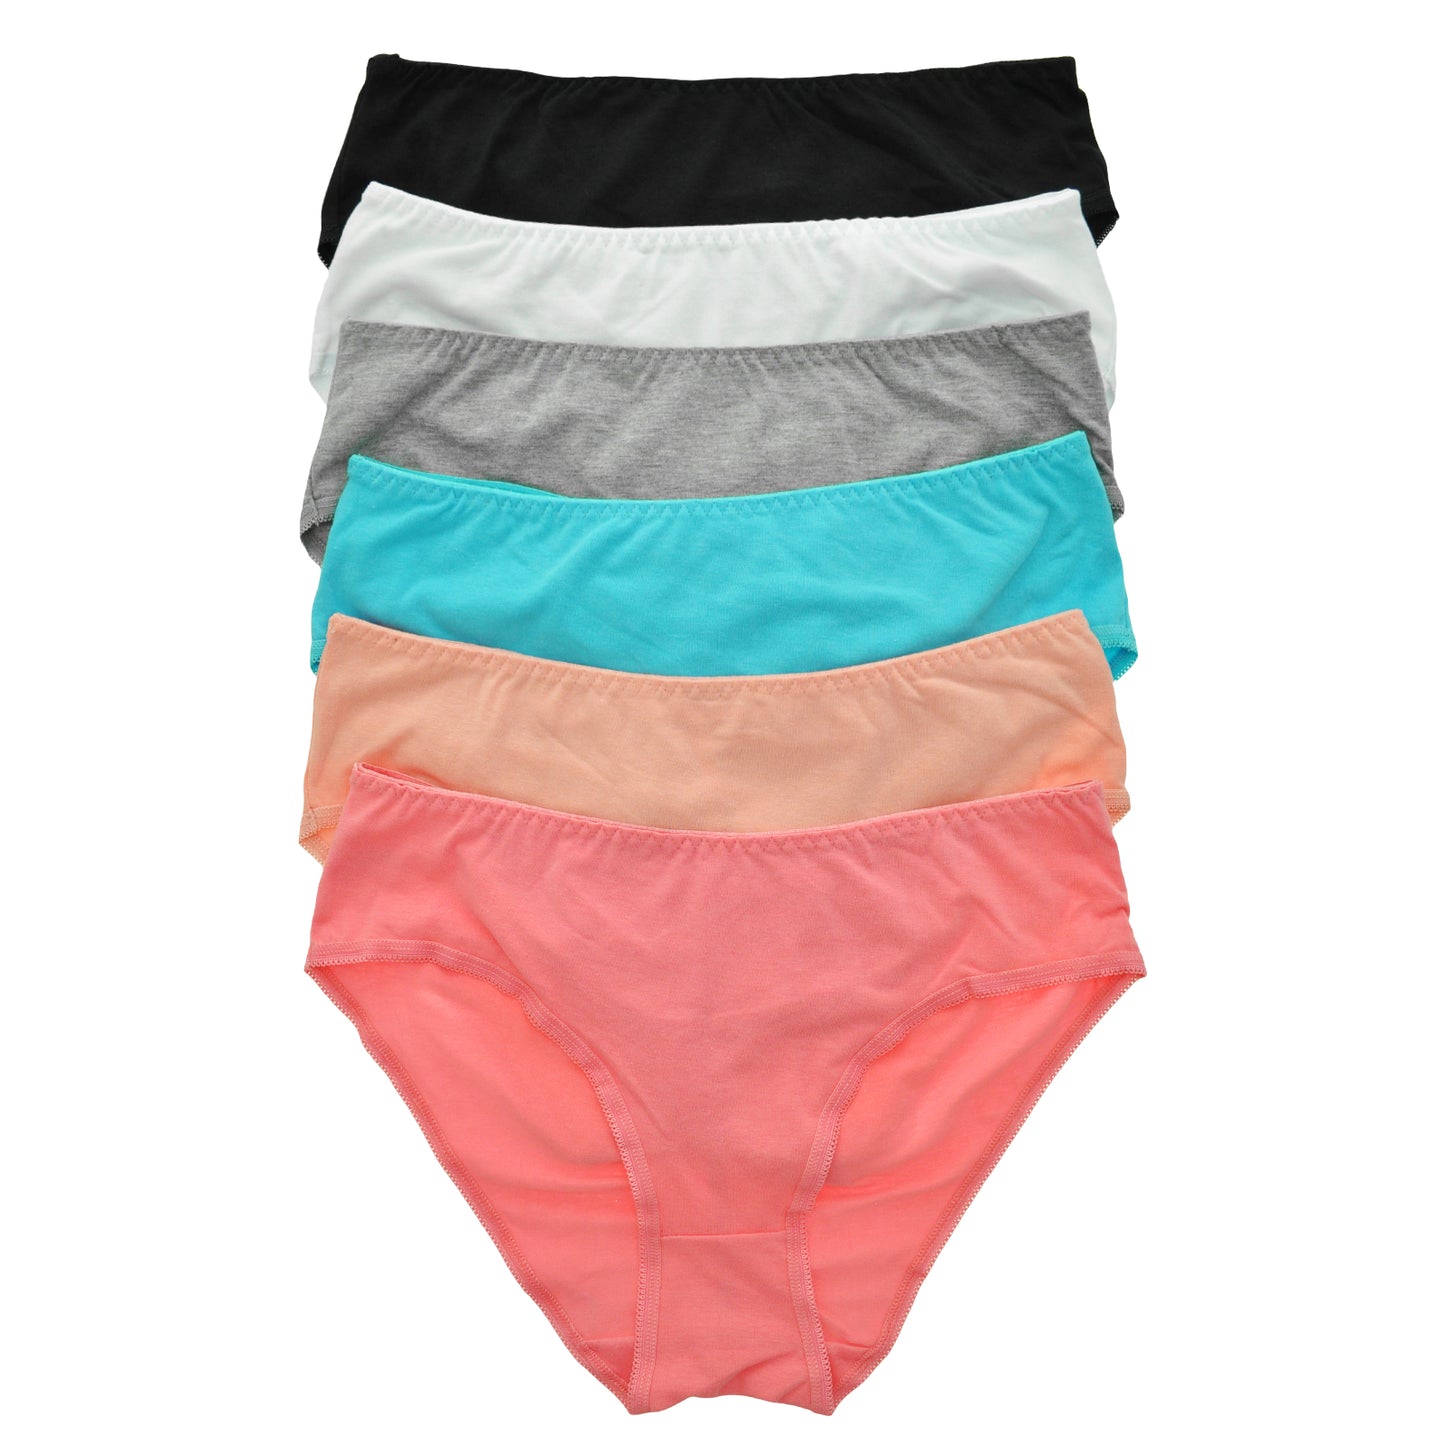 Cotton Bikini Panties with Ruched Center Back (6-Pack)